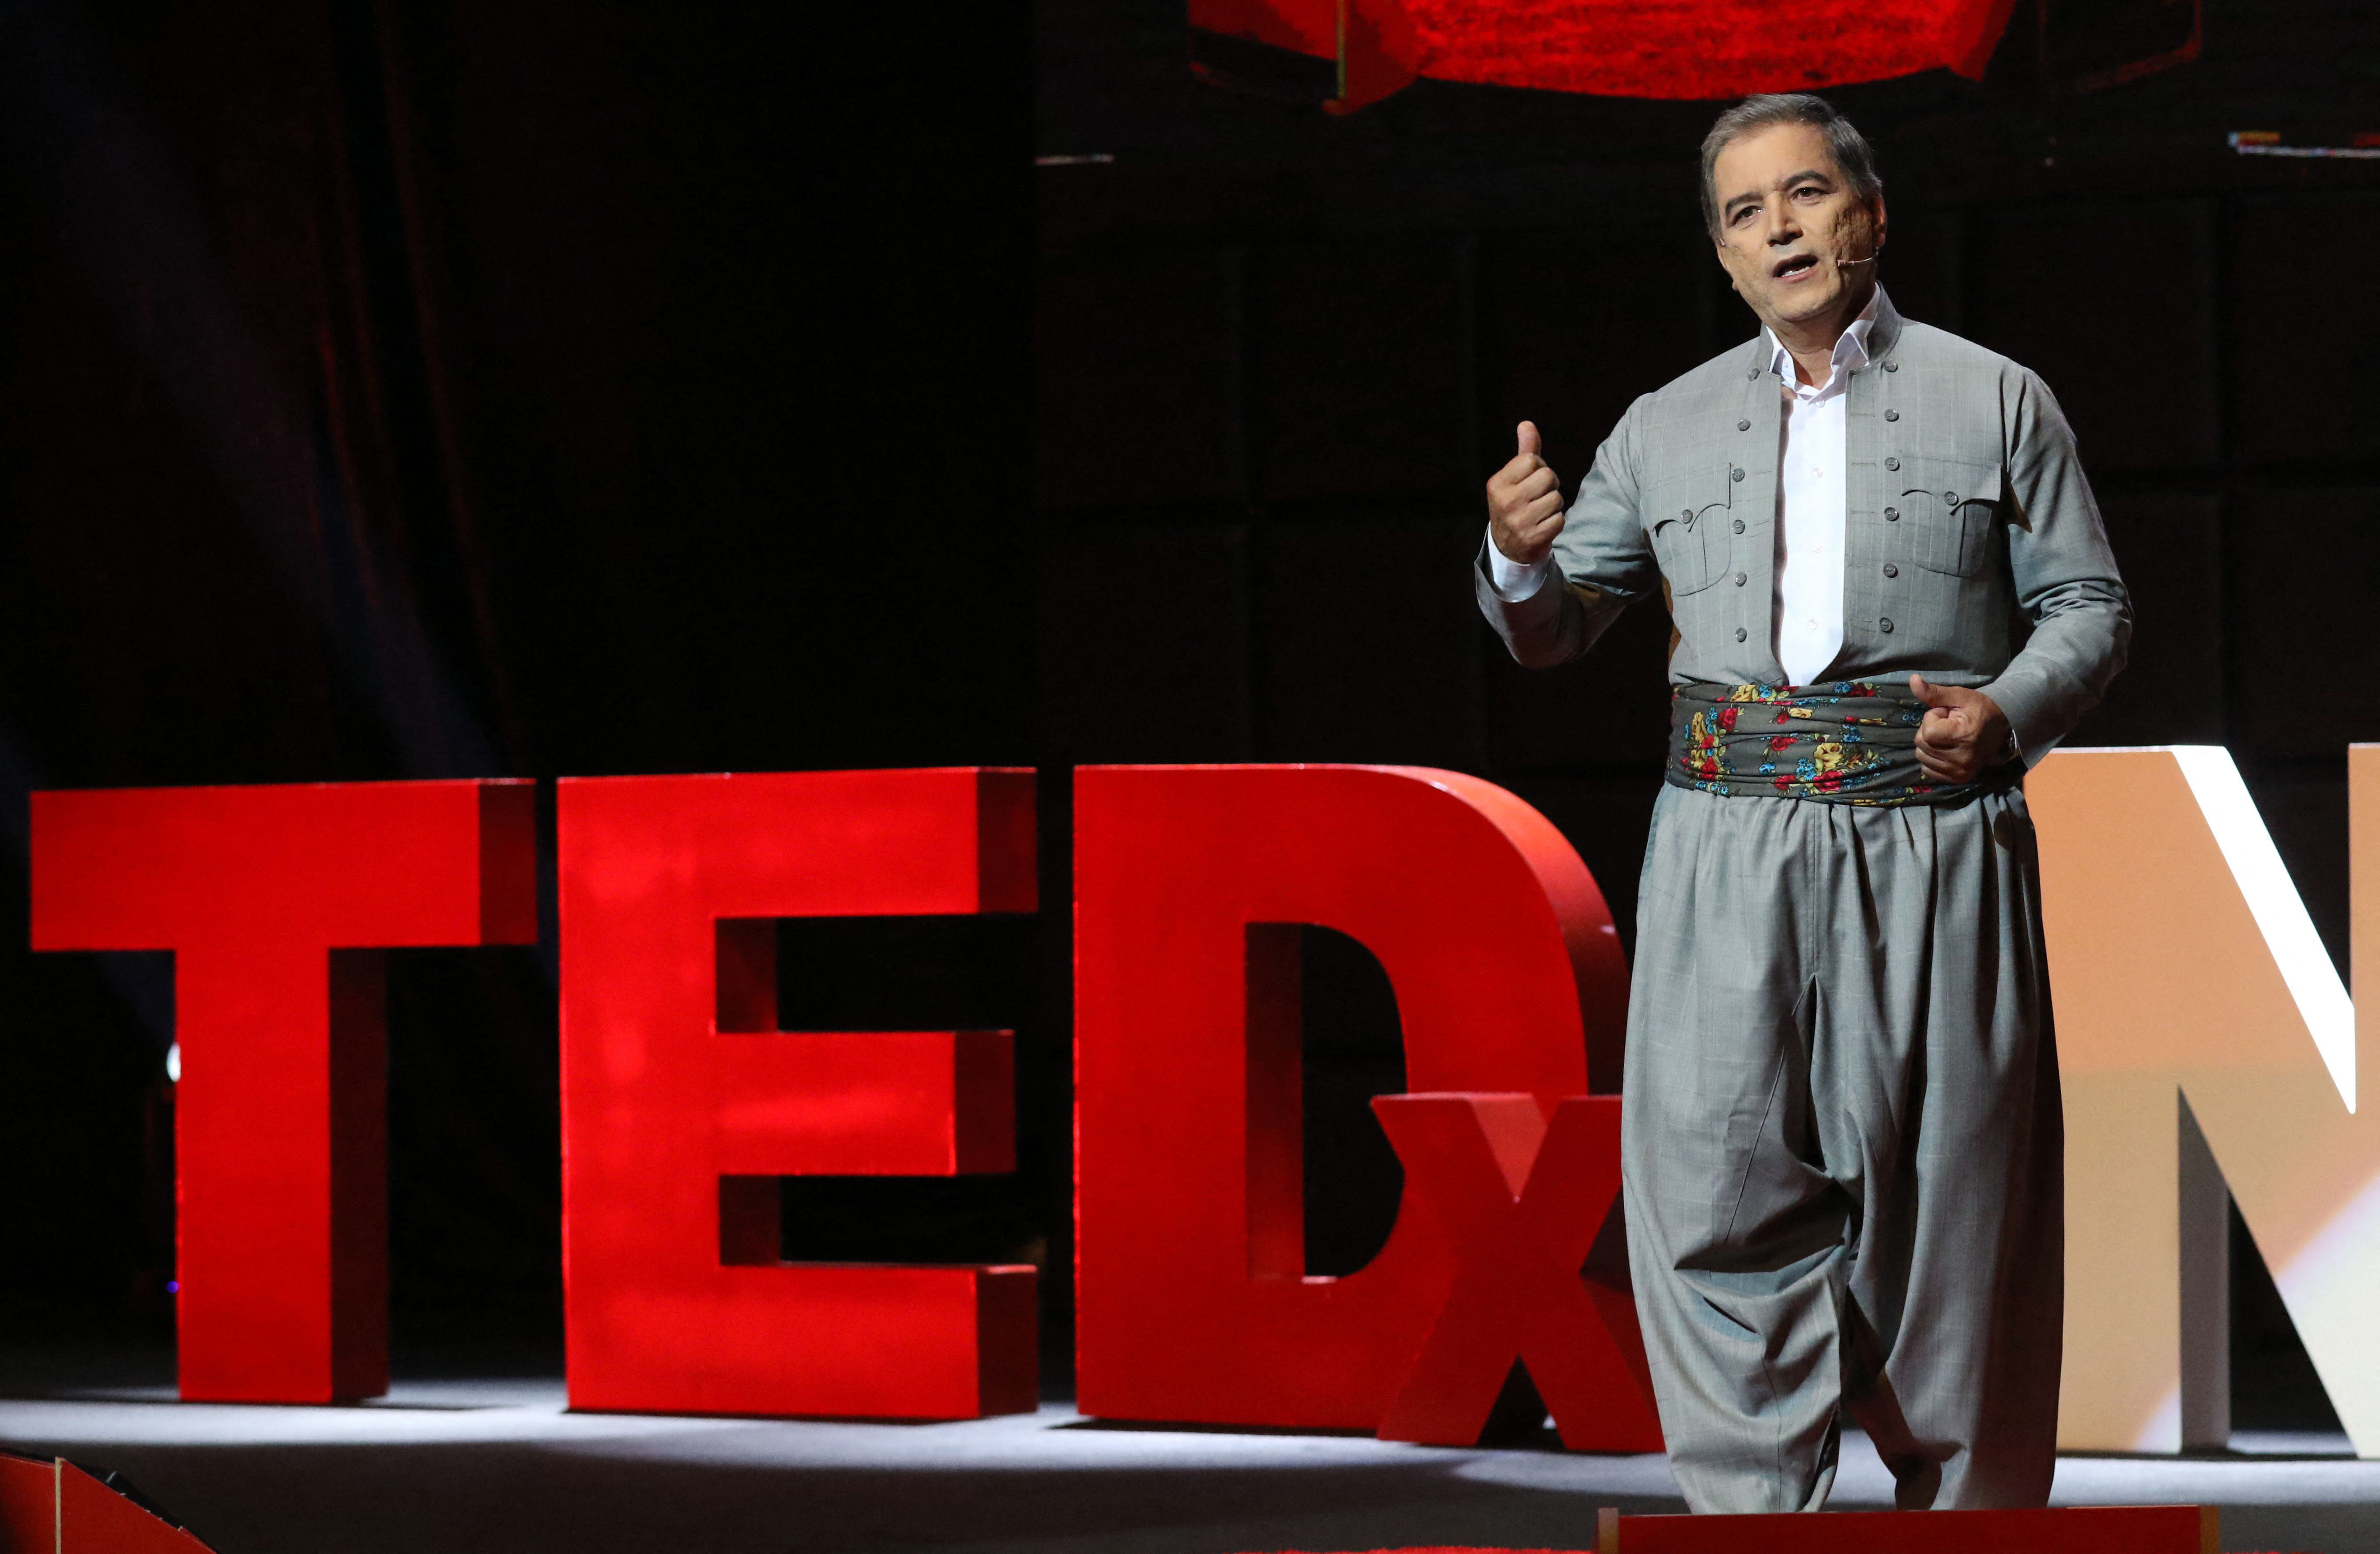 3 TED Talks to inspire and motivate students